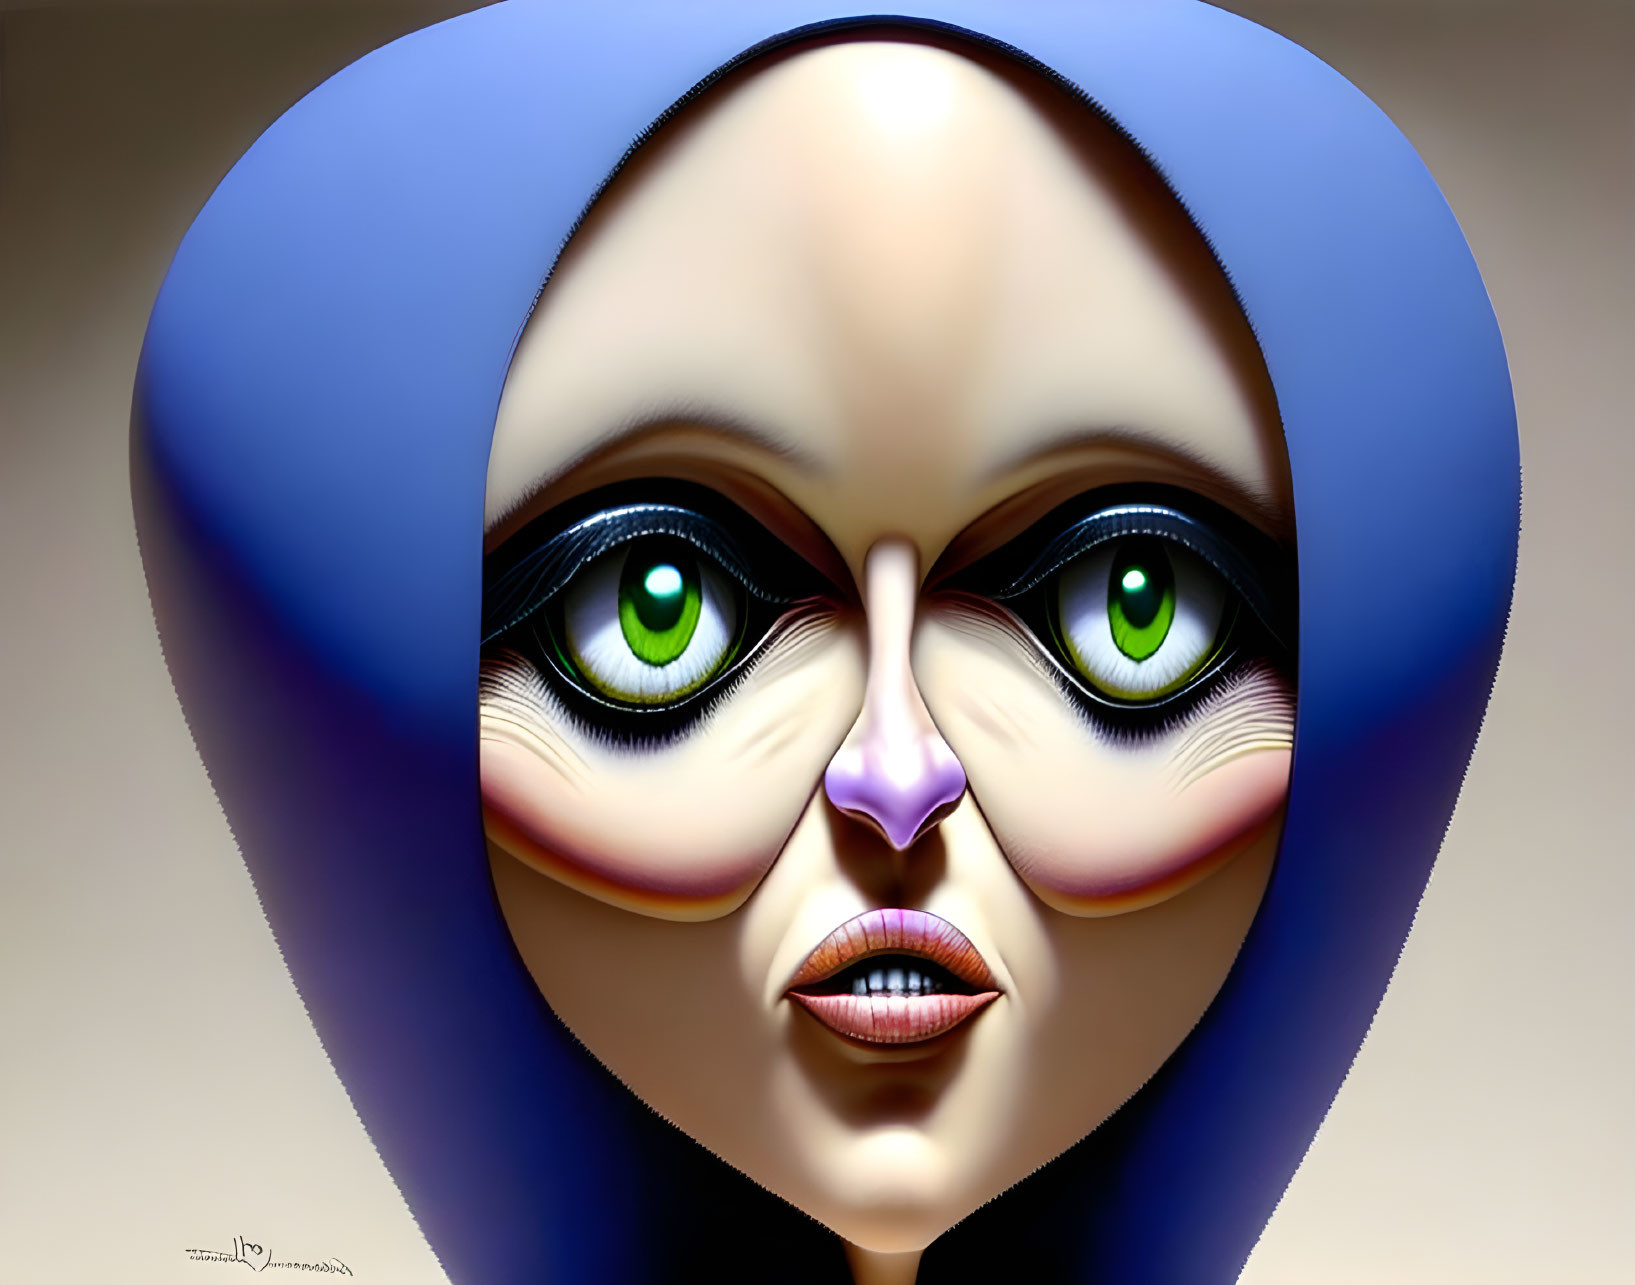 Exaggerated large eyes and features in surreal digital art